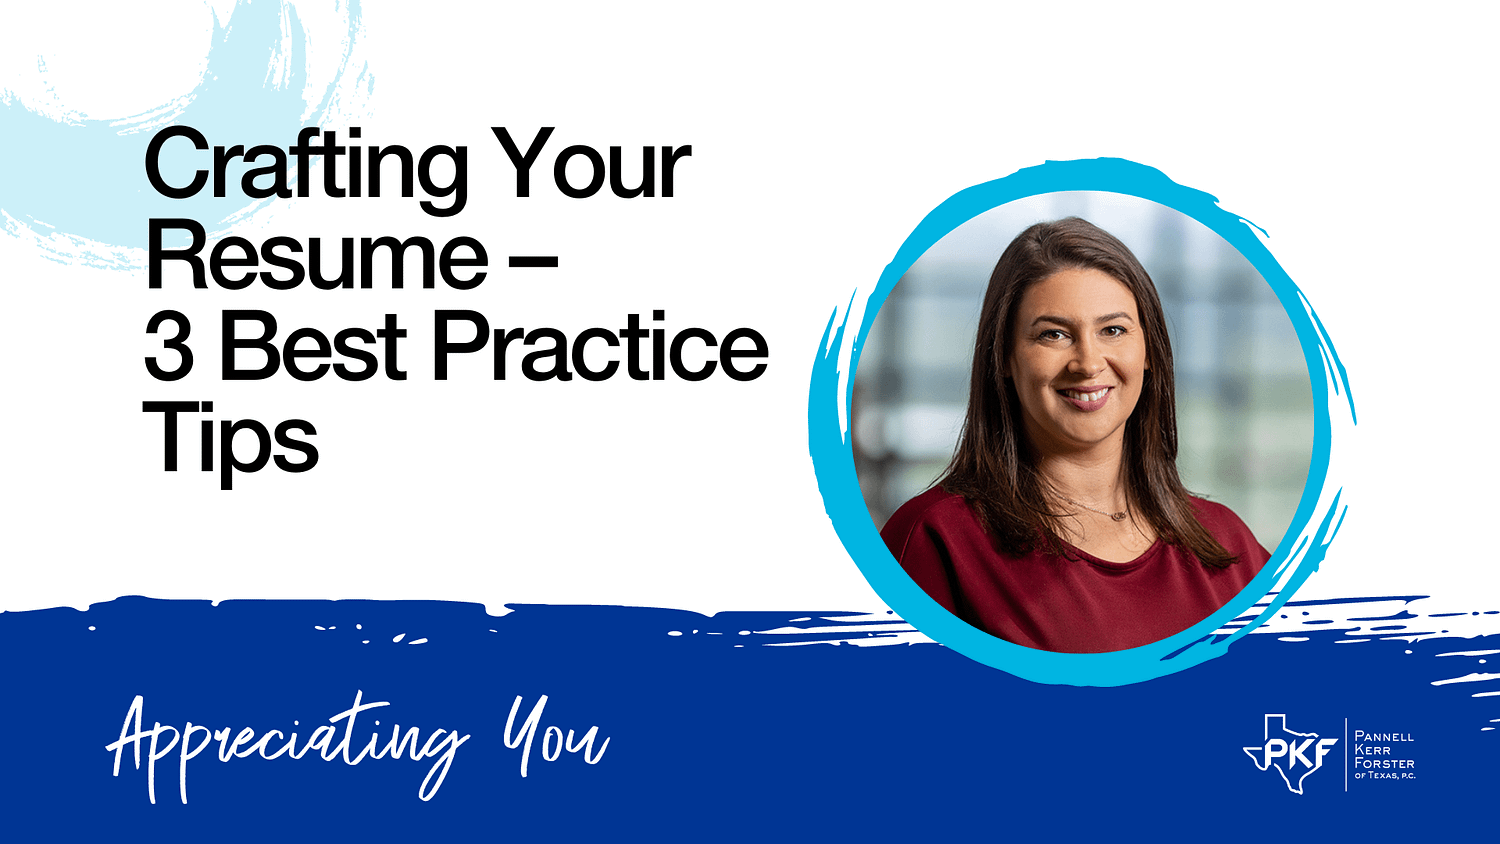 Crafting Your Resume – 3 Best Practice Tips